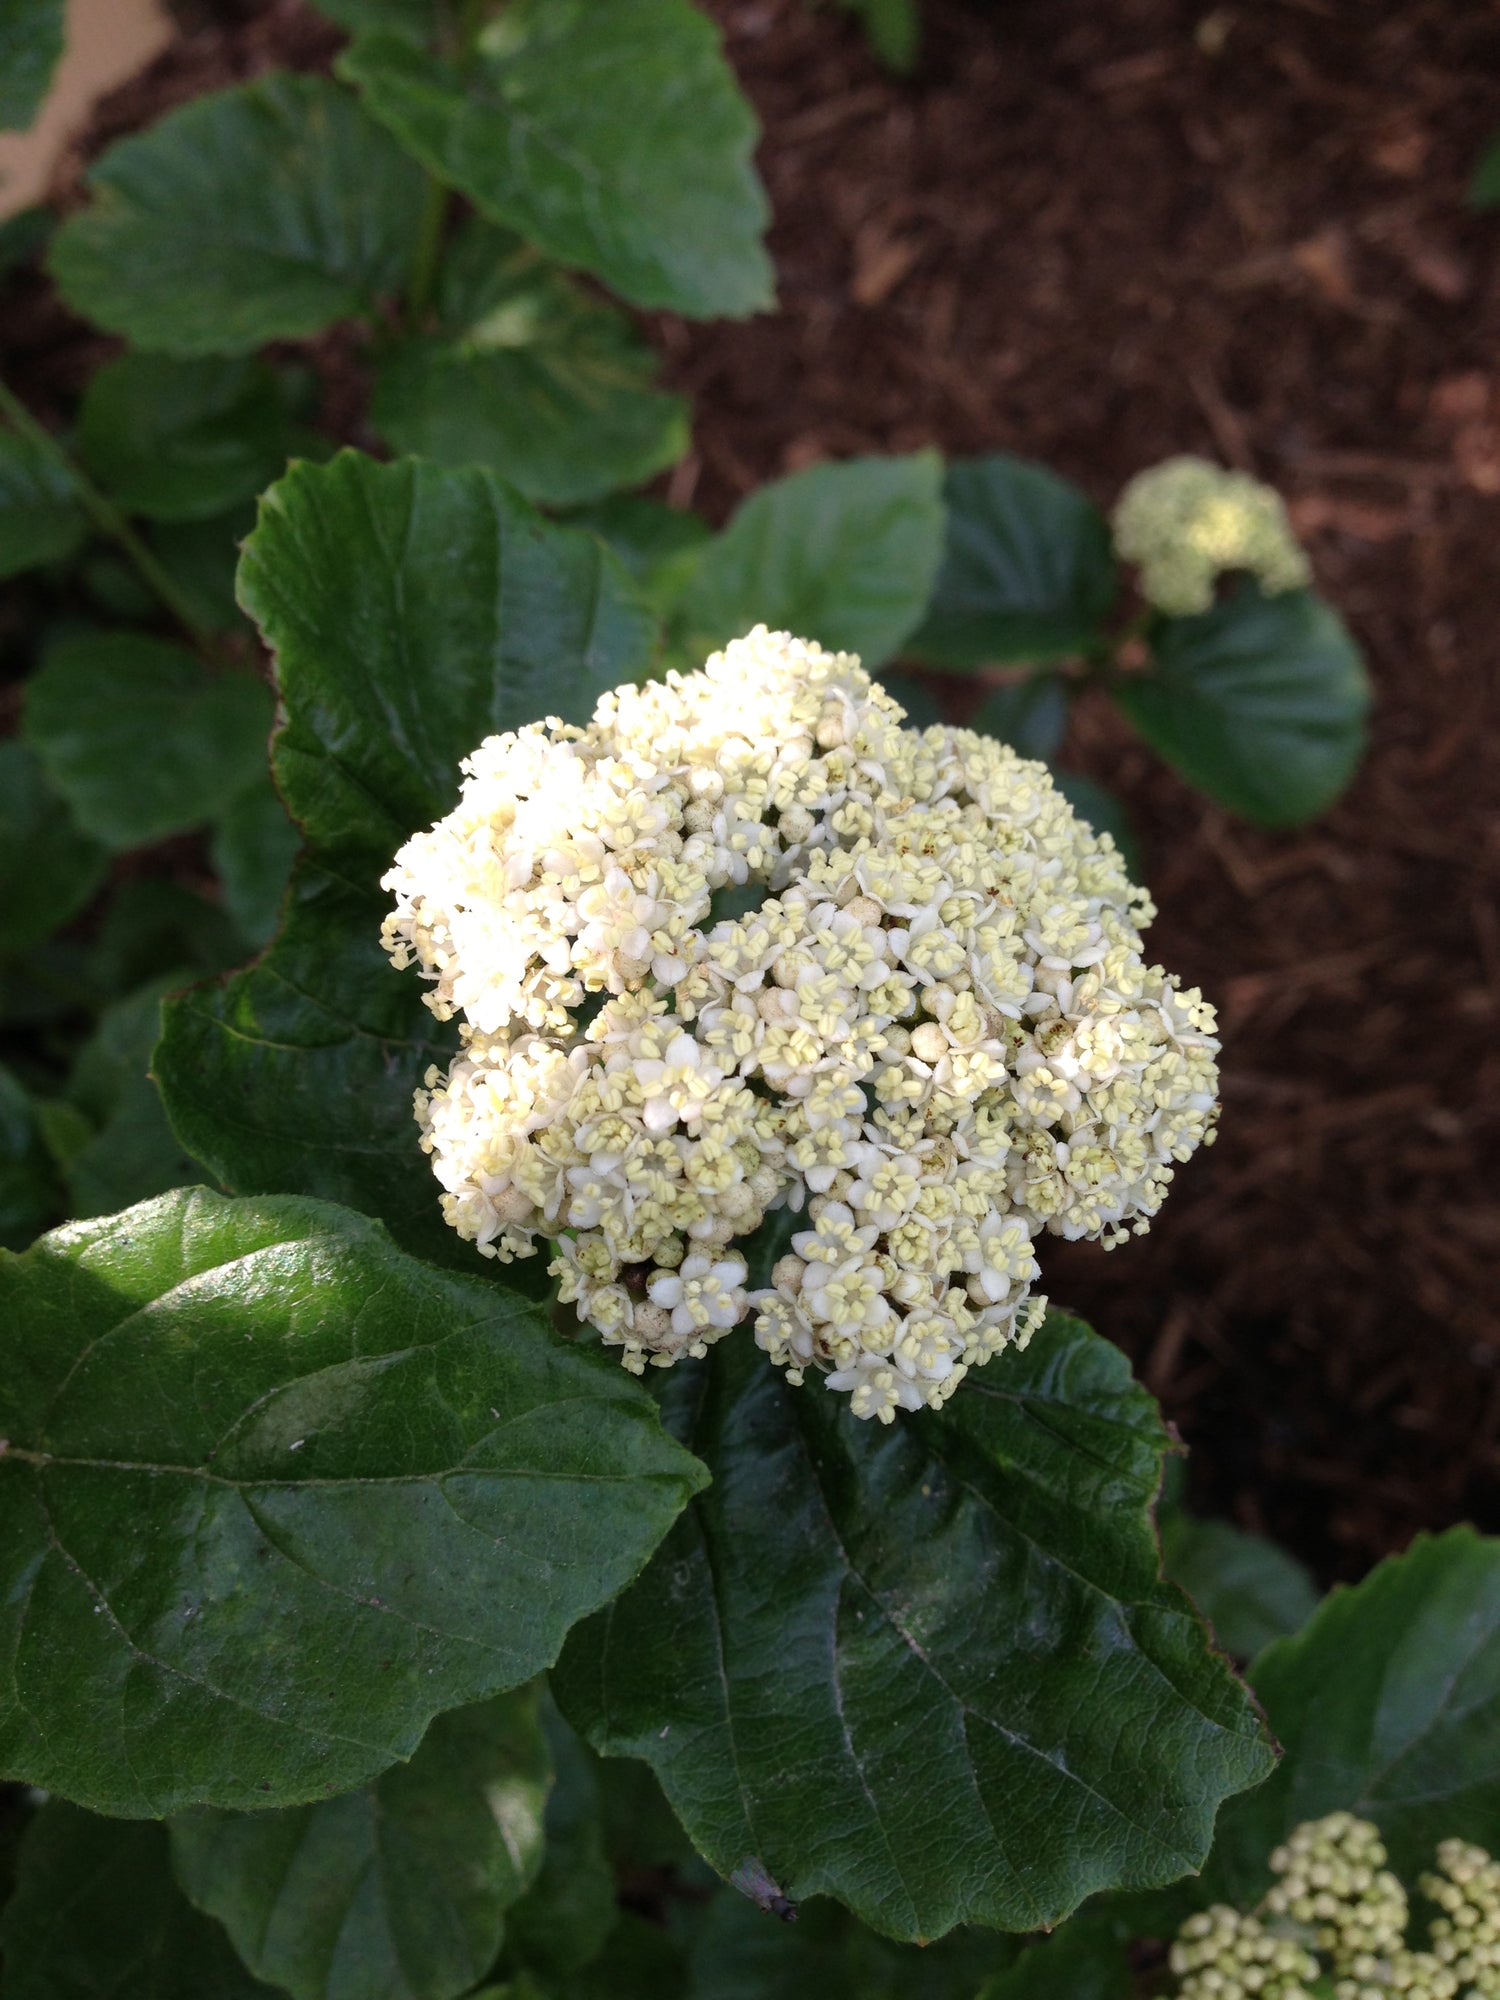 A cluster of white flowers on All That Glitters viburnum